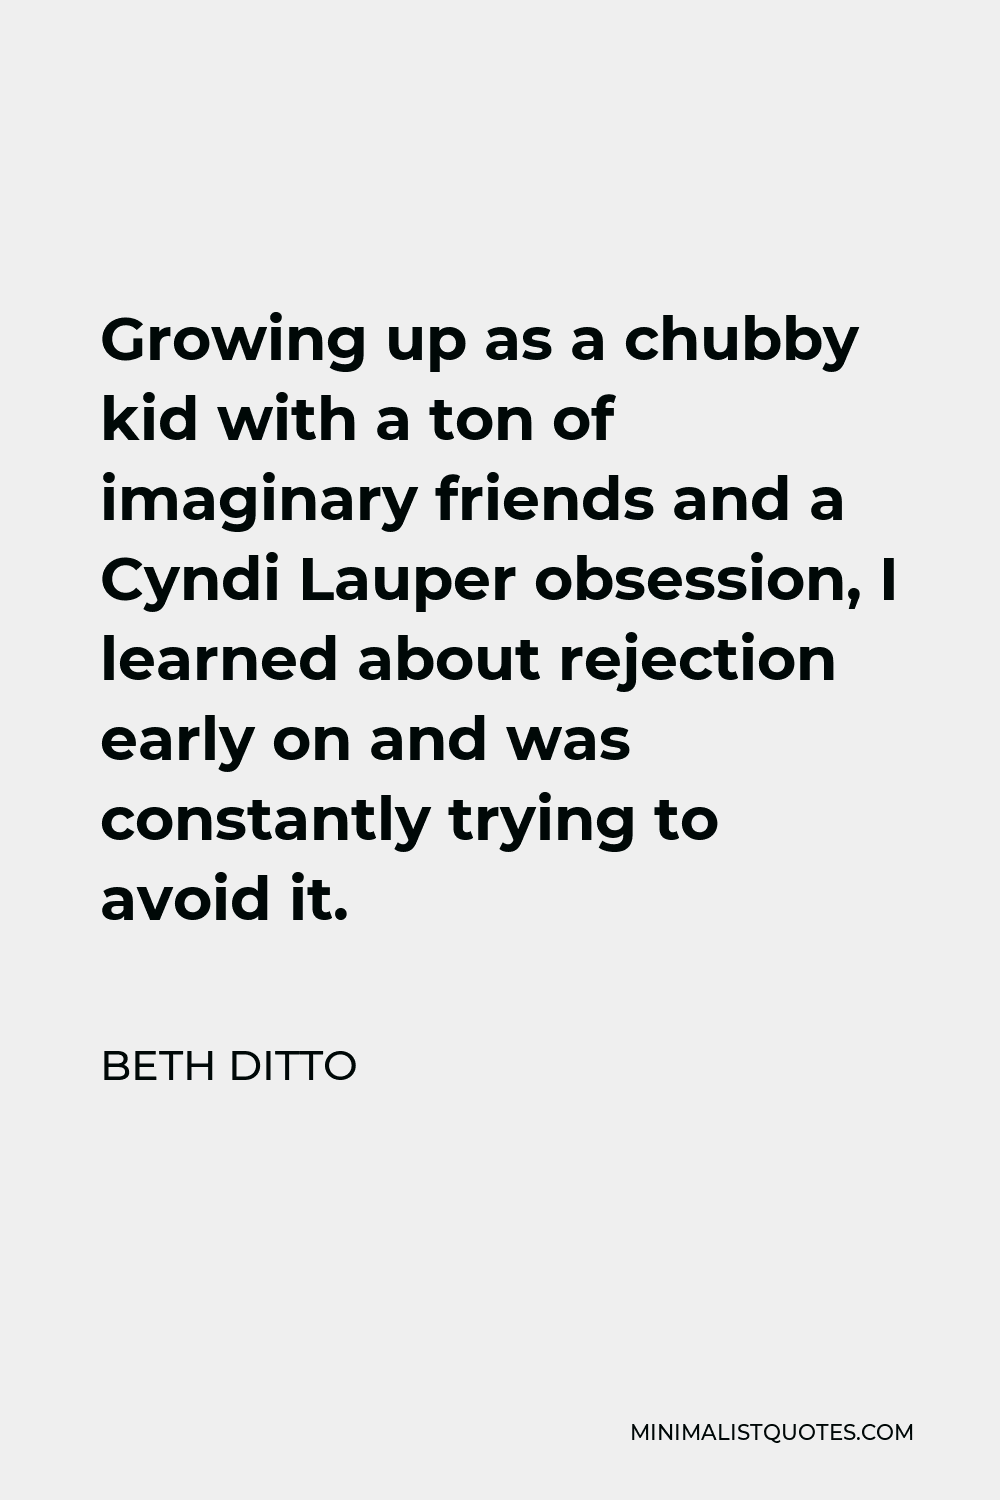 Beth Ditto Quote - Growing up as a chubby kid with a ton of imaginary friends and a Cyndi Lauper obsession, I learned about rejection early on and was constantly trying to avoid it.